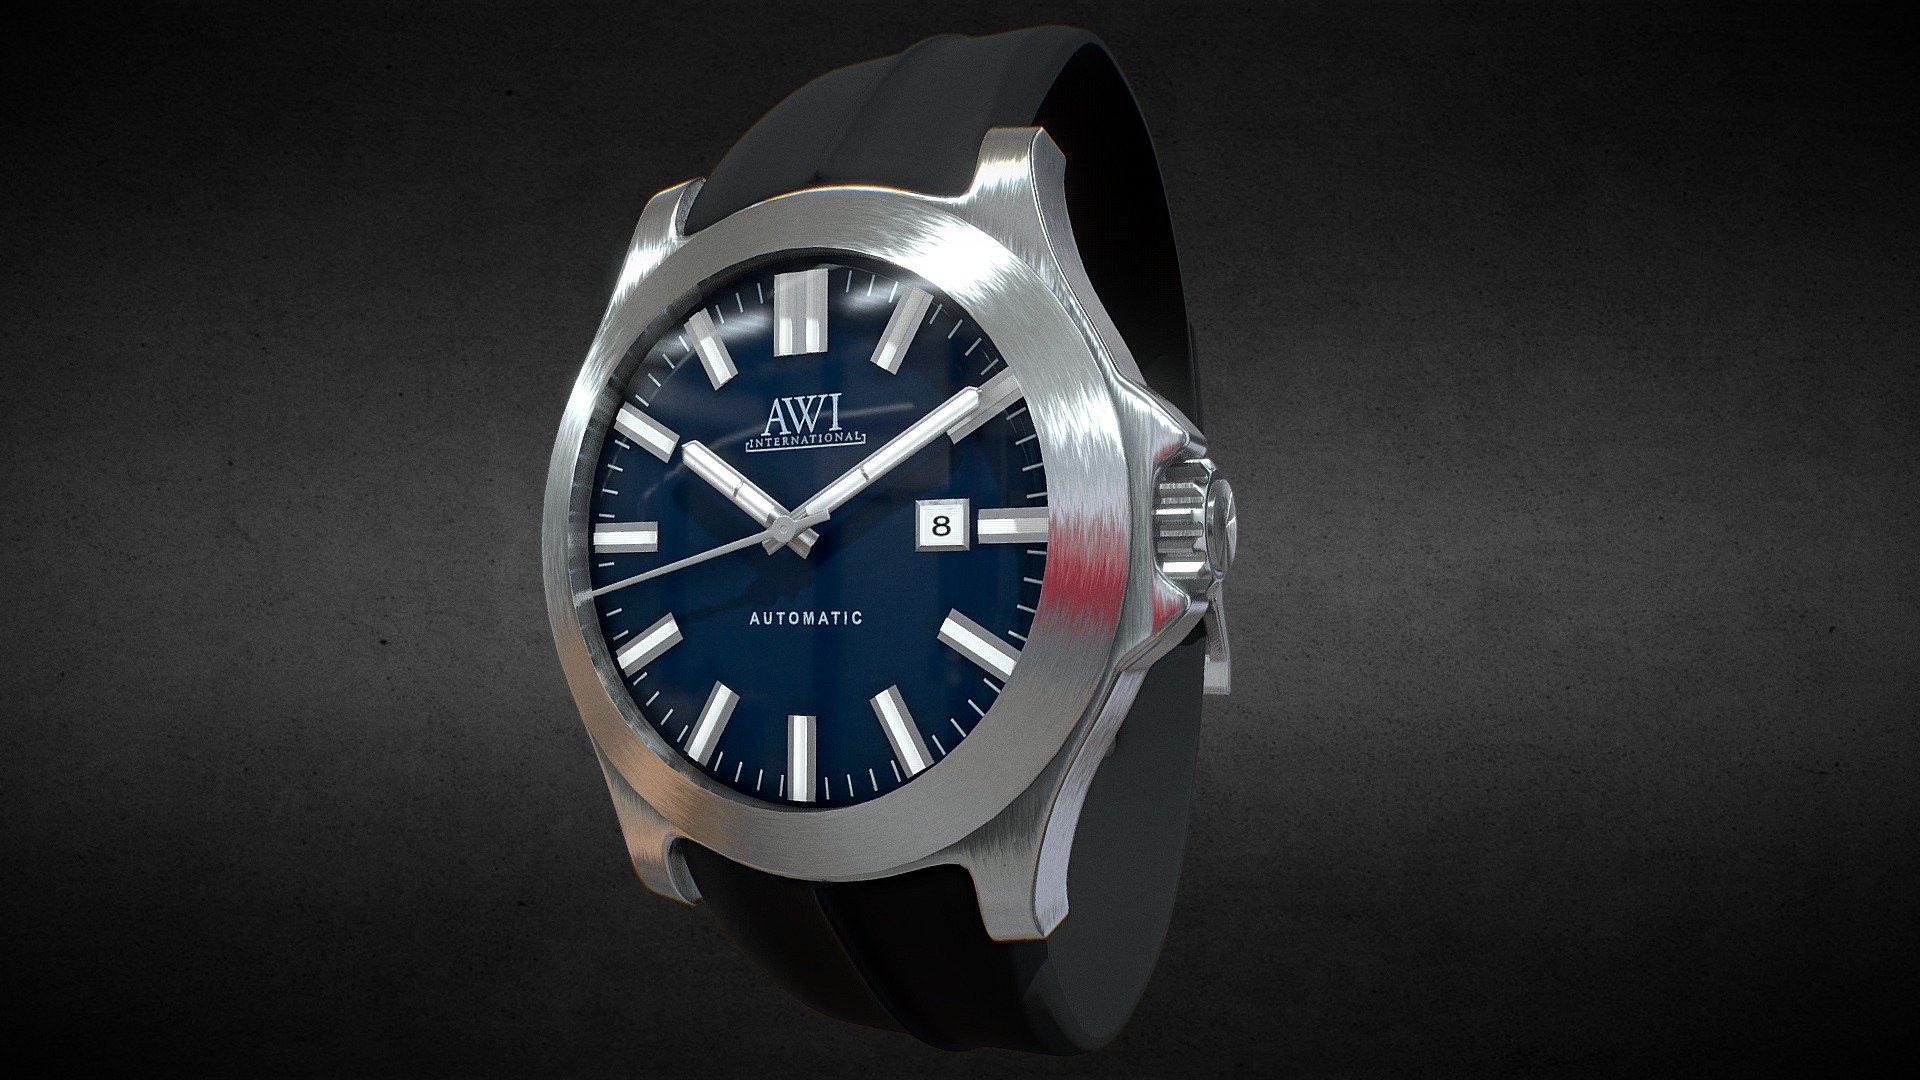 Awesome stainless steel AWI AW5008A.K Men's Automatic Mechanical Watch․
Use for Unreal Engine 4 and Unity3D. Try in augmented reality in the AR-Watches app. 
Links to the app: Android, iOS

Currently available for download in FBX format.

3D model developed by AR-Watches

Disclaimer: We do not own the design of the watch, we only made the 3D model 3d model